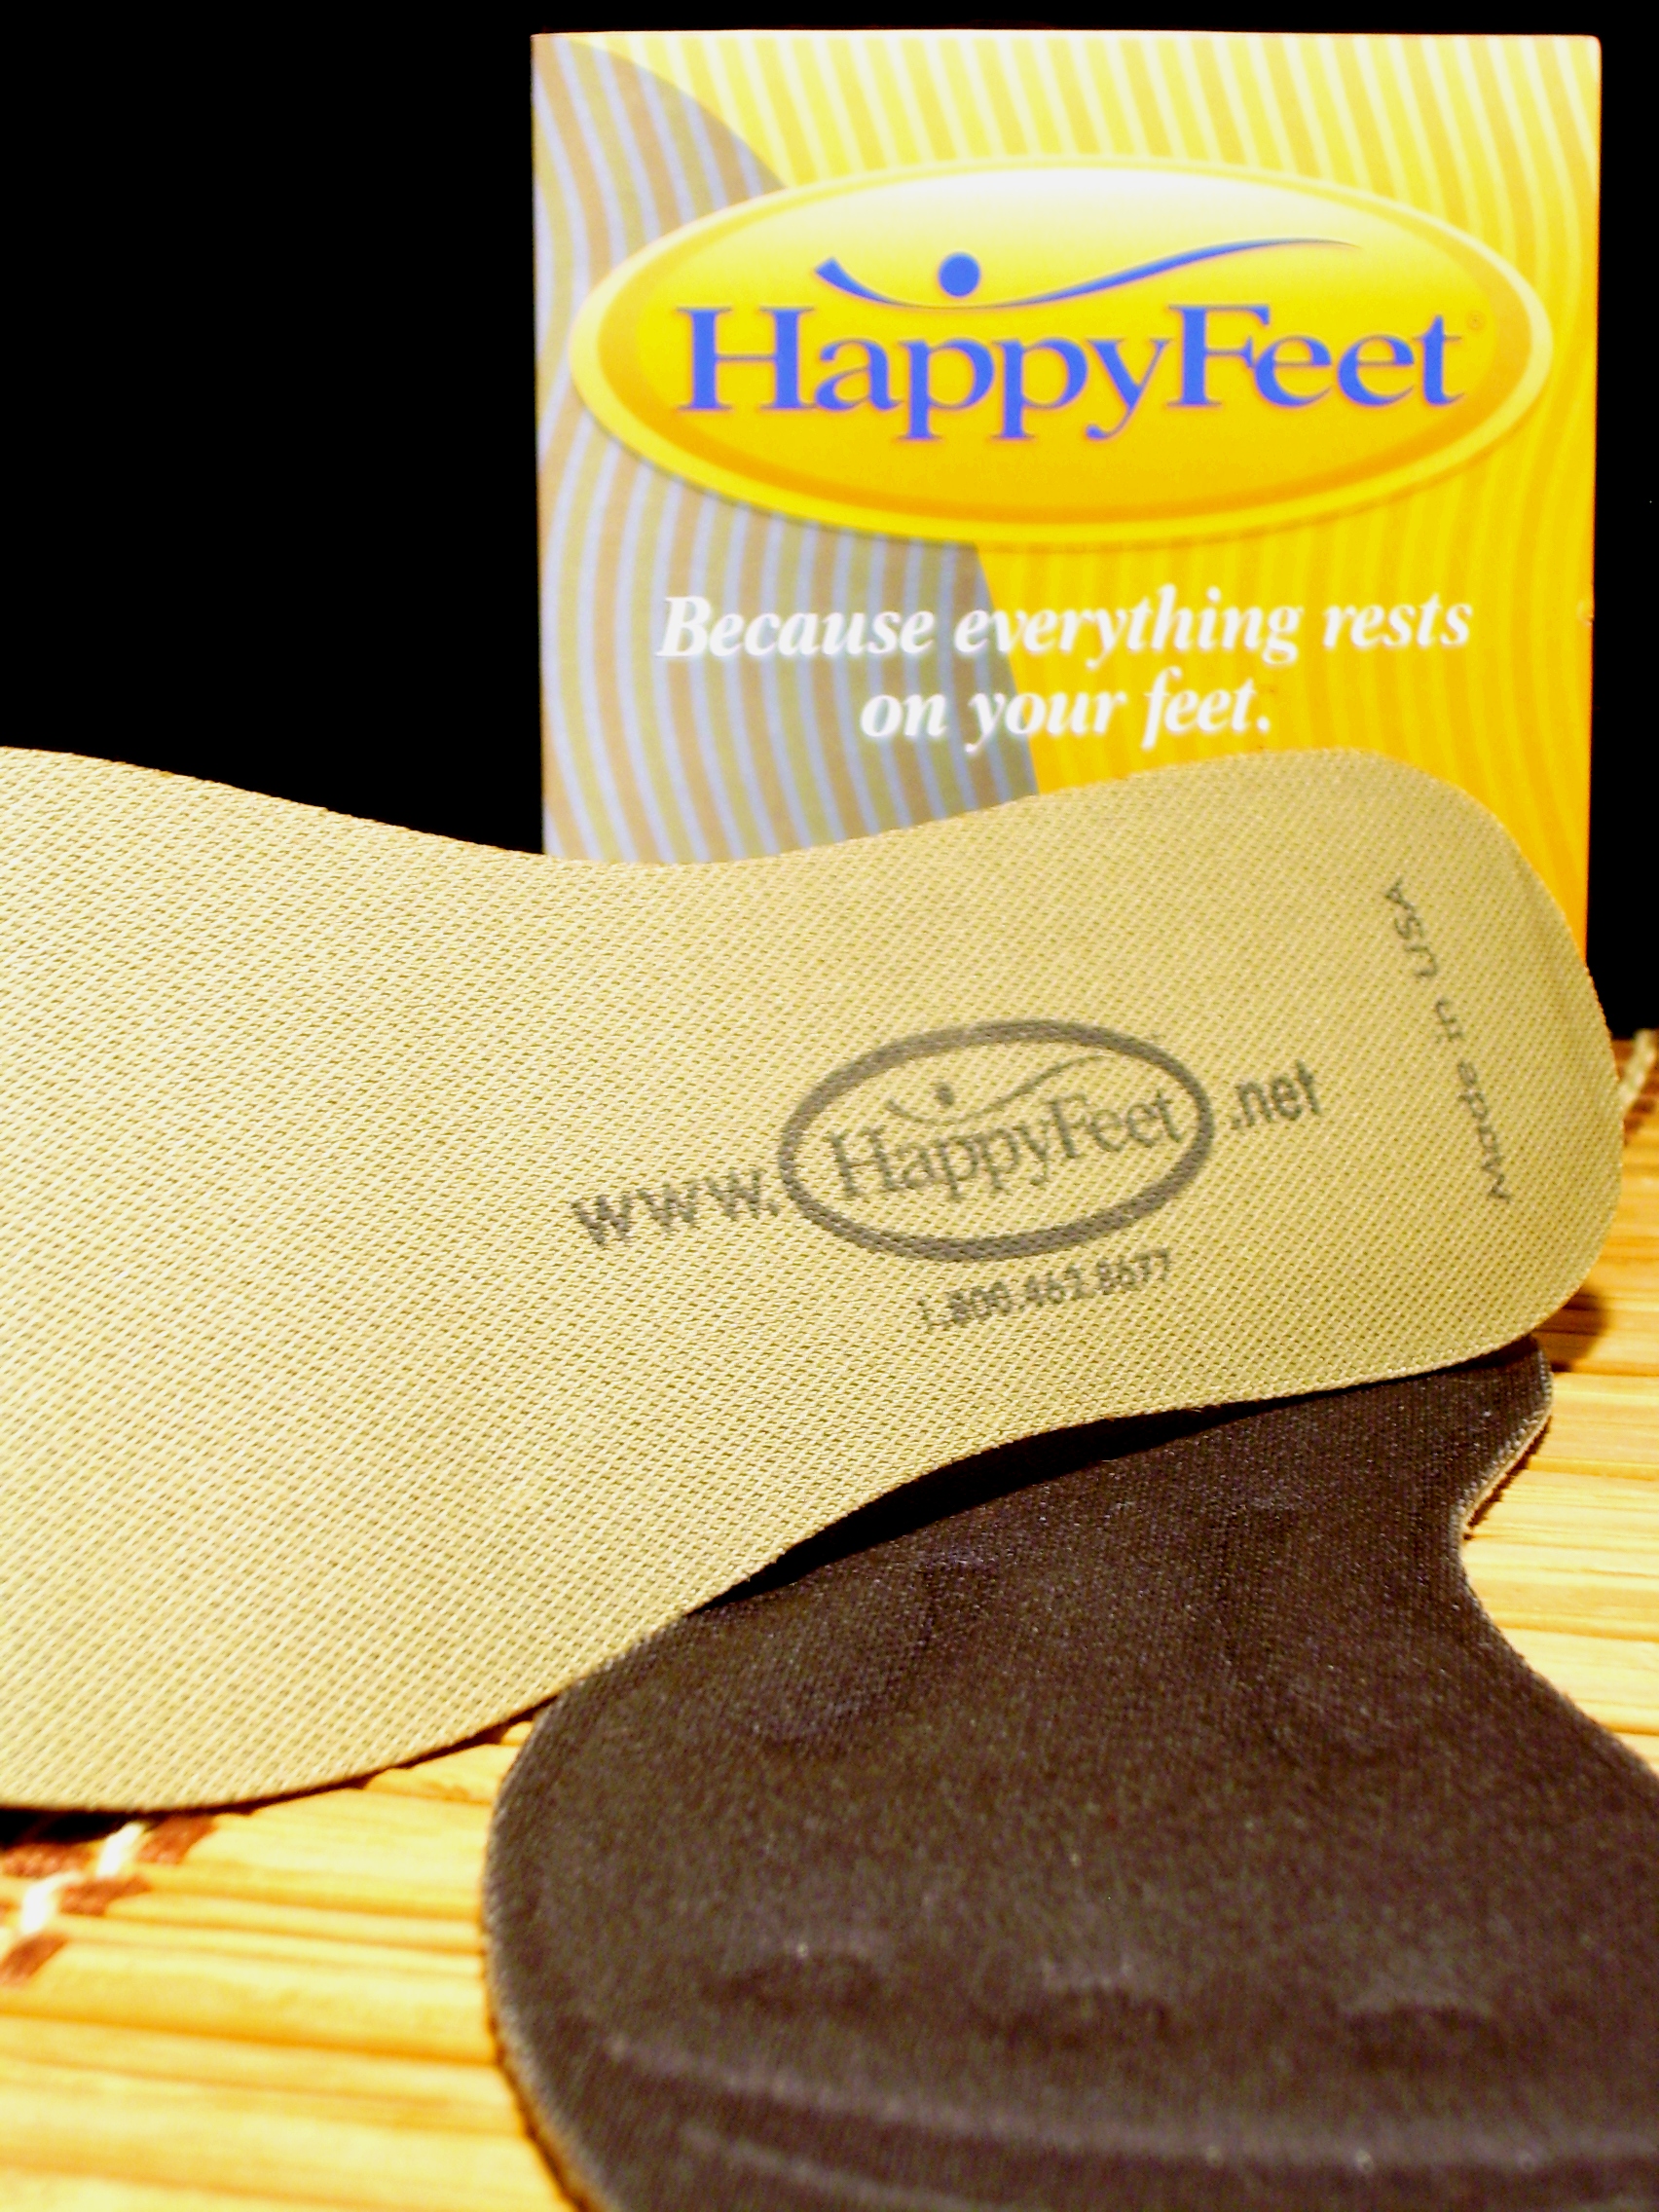 Happy Feet® Insoles are Clinically 